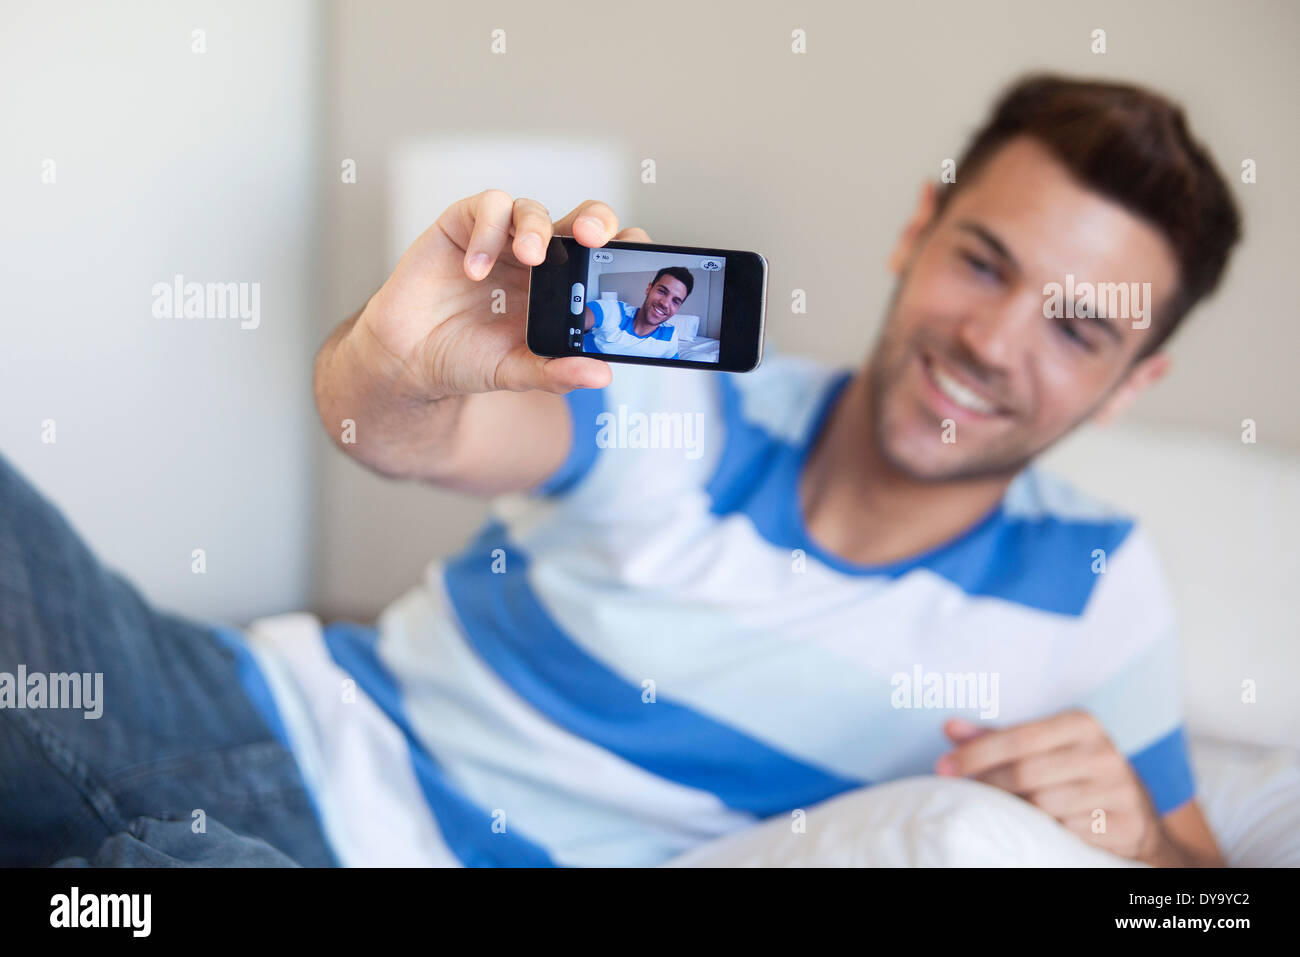 Young man reclining on bed taking selfie with smartphone Stock Photo